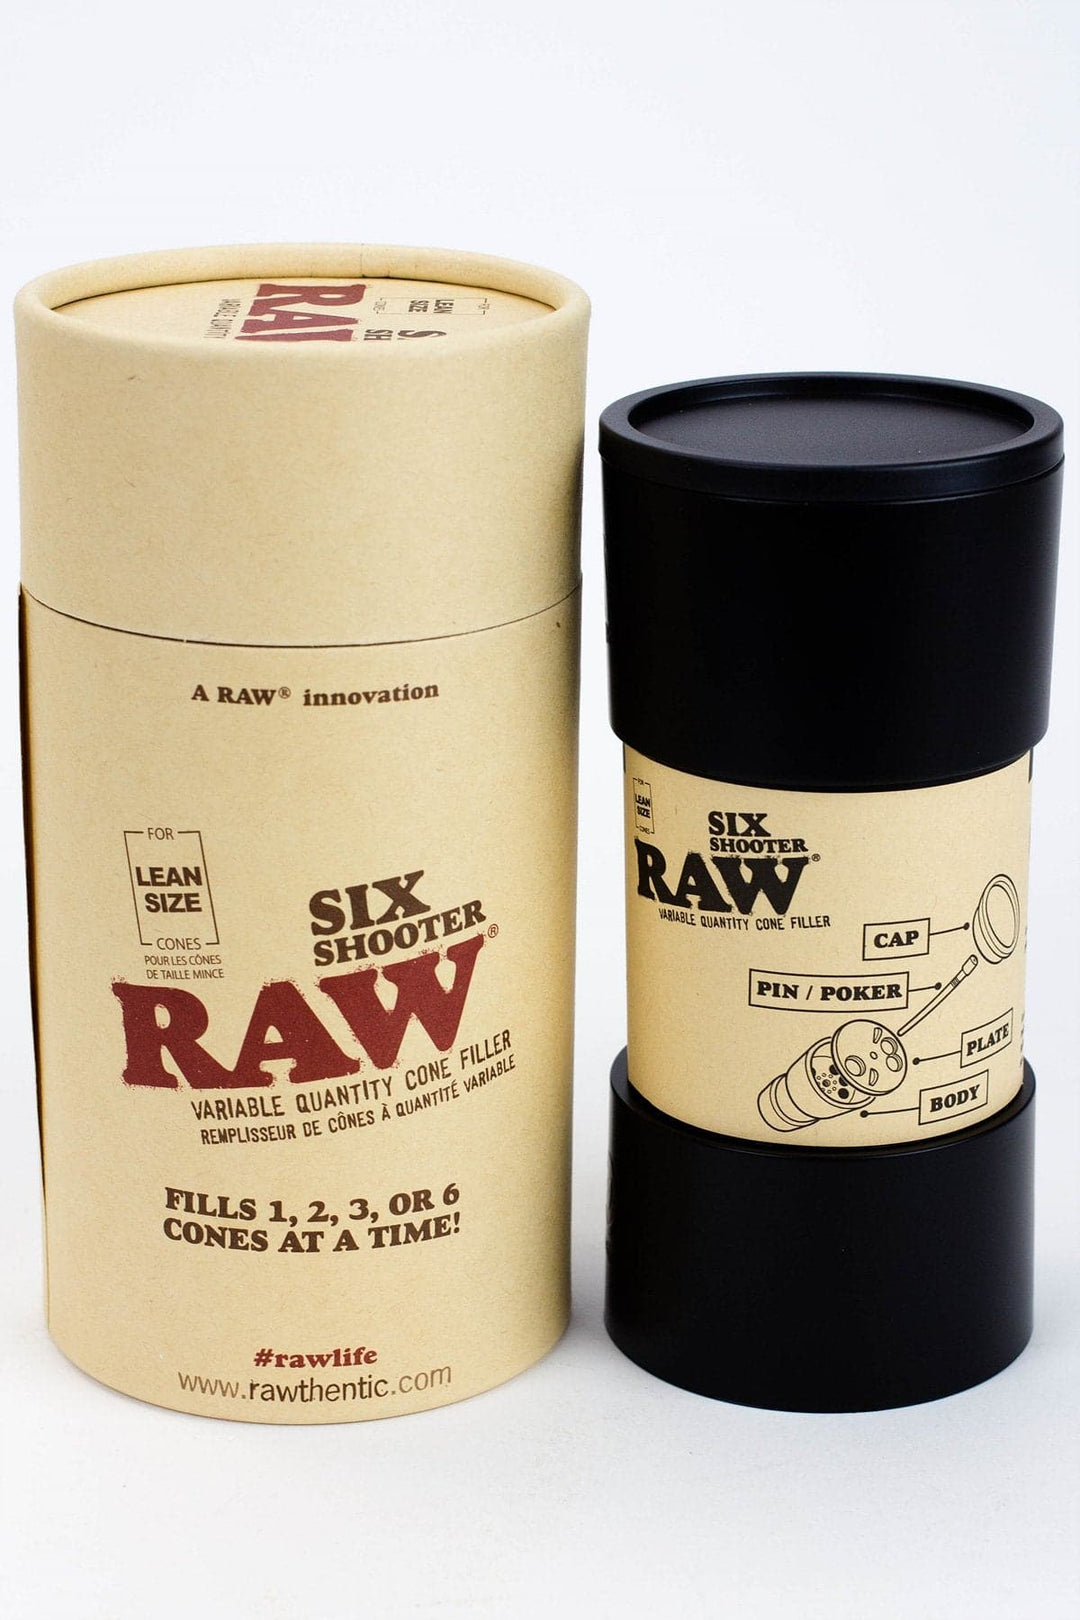 Raw six shooter for Lean size cones